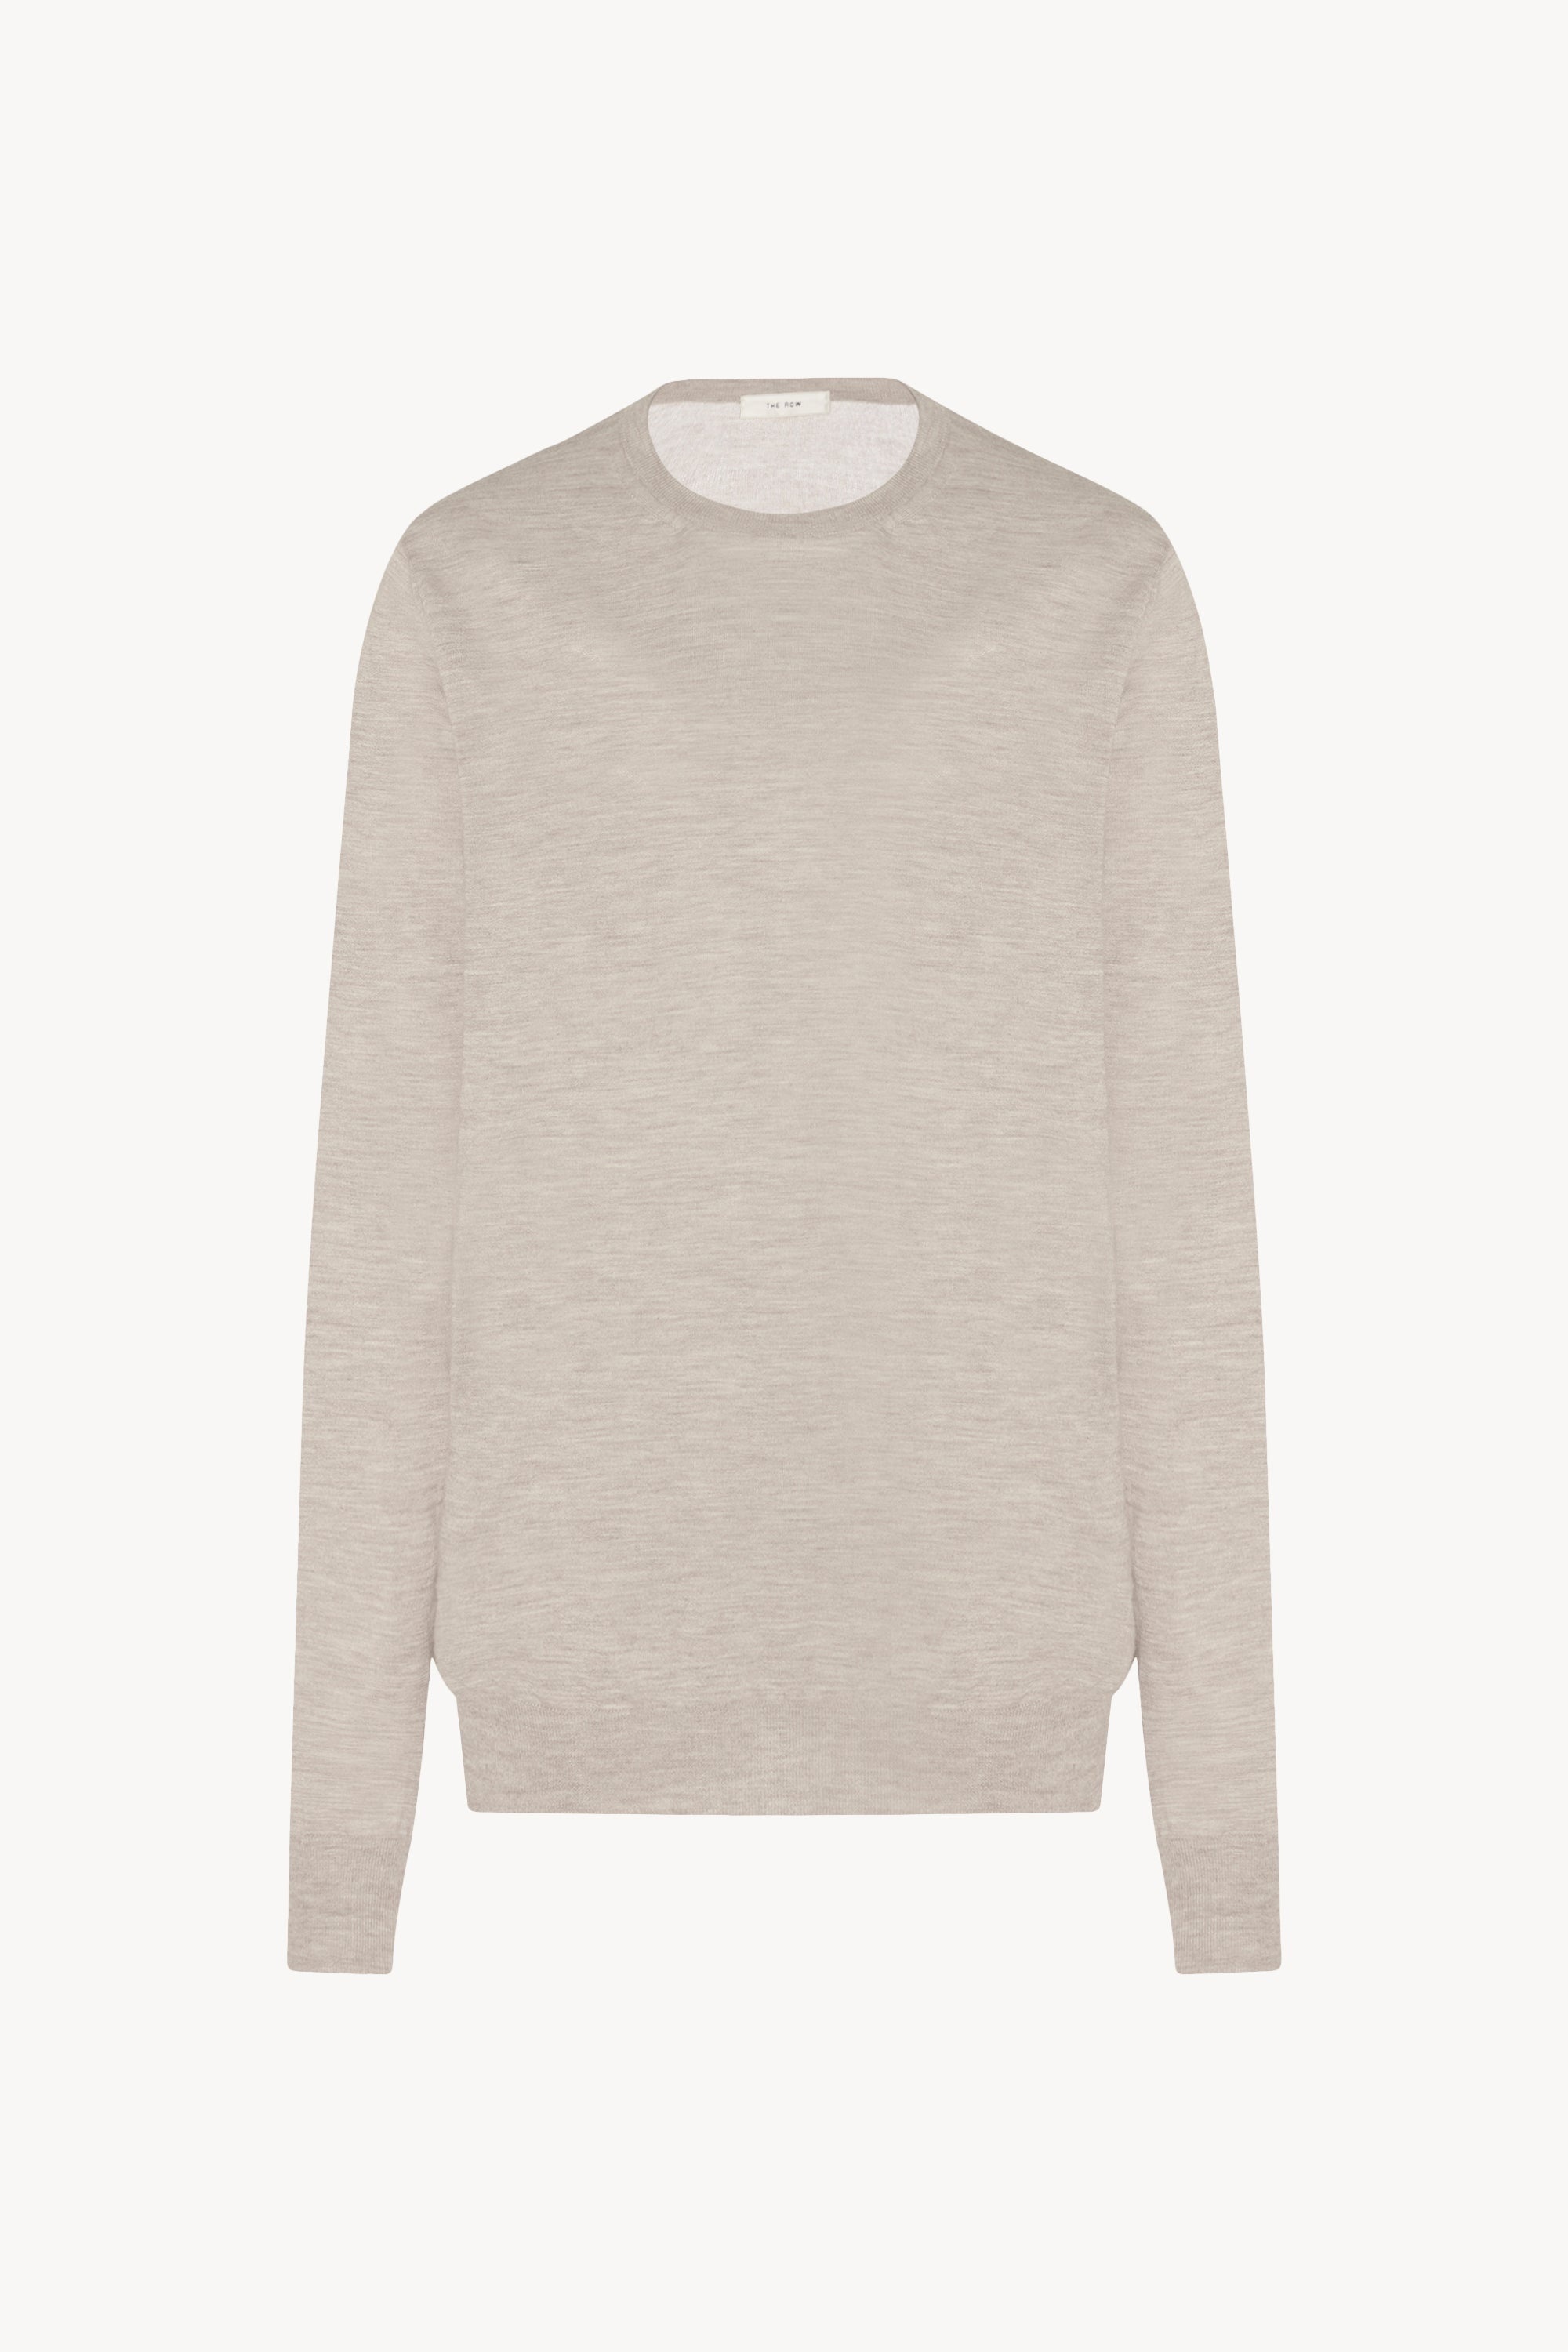 Exeter Top in Cashmere - 1